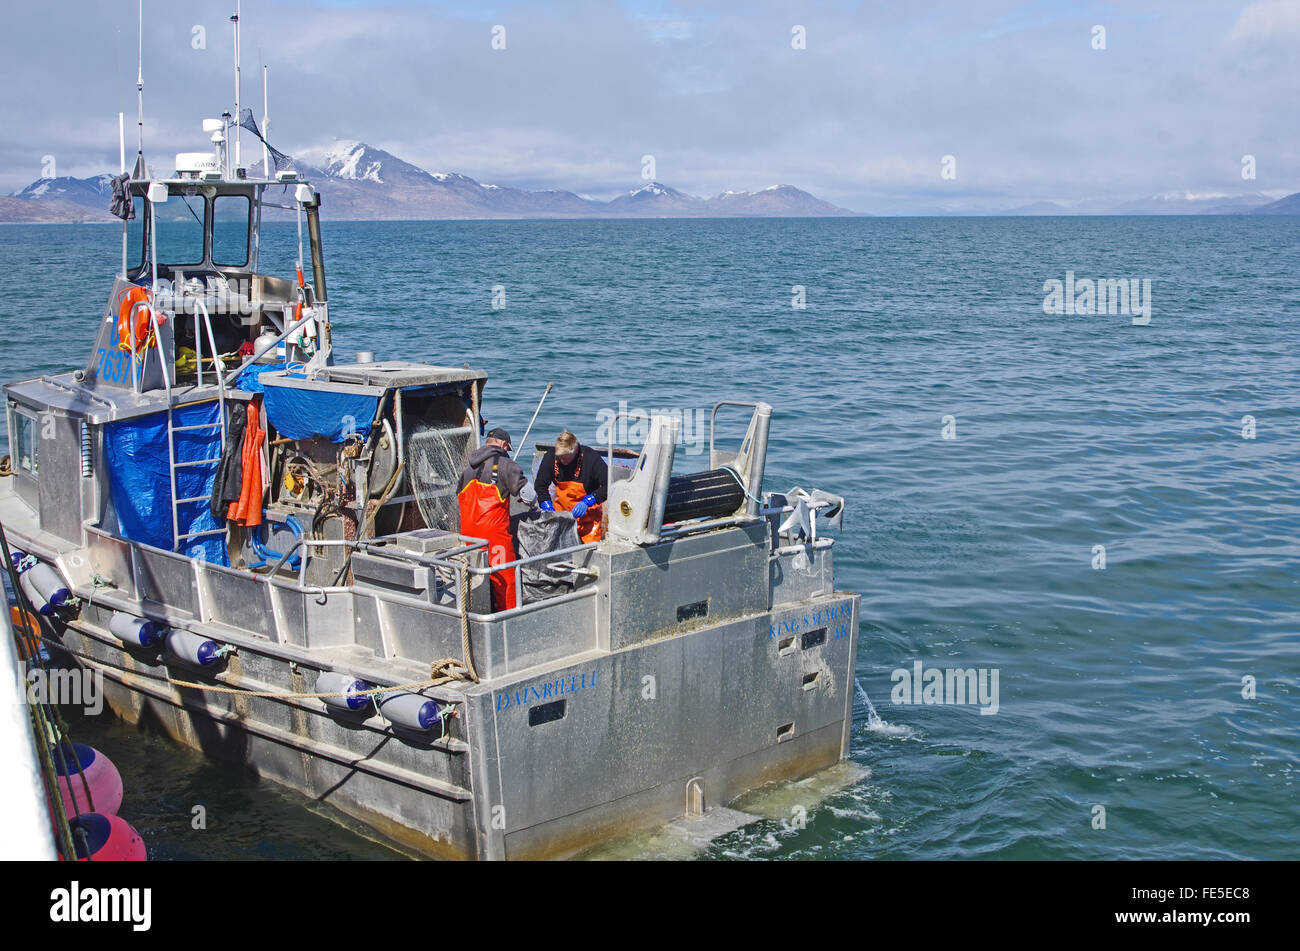 Fishermen untangling a herring gill net on the deck of a boat in